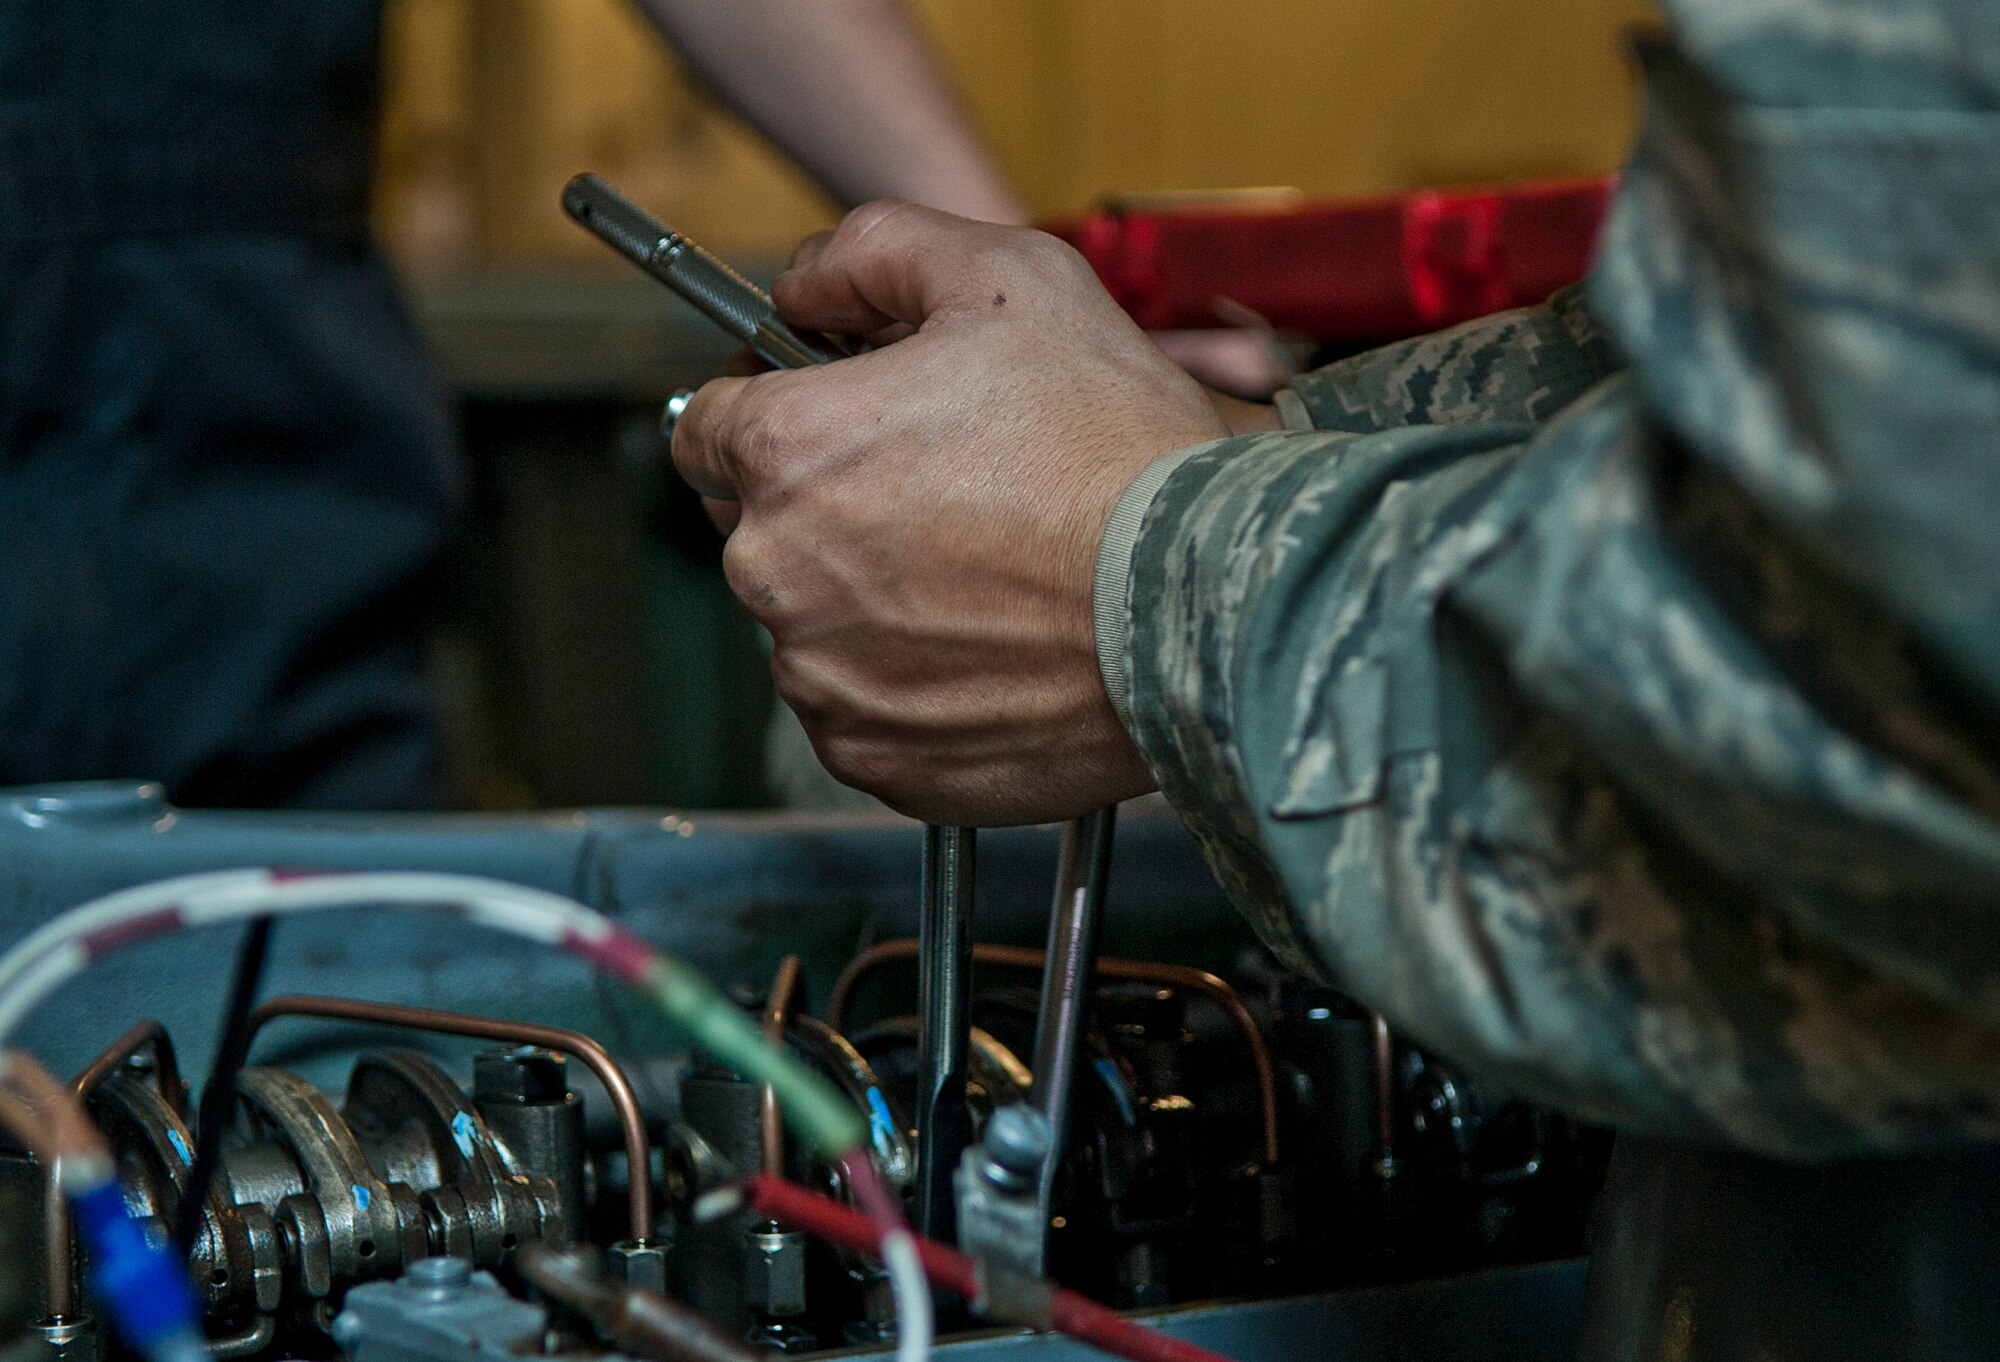 An aerospace ground equipment Airman with the 5th Maintenance Squadron performs a tune-up on an engine at Minot Air Force Base, N.D., Oct. 5, 2016. The AGE specialists ensure Minot AFB’s B-52H Stratofortress equipment is serviceable and ready for flight. (U.S. Air Force photo/Airman 1st Class Jonathan McElderry)